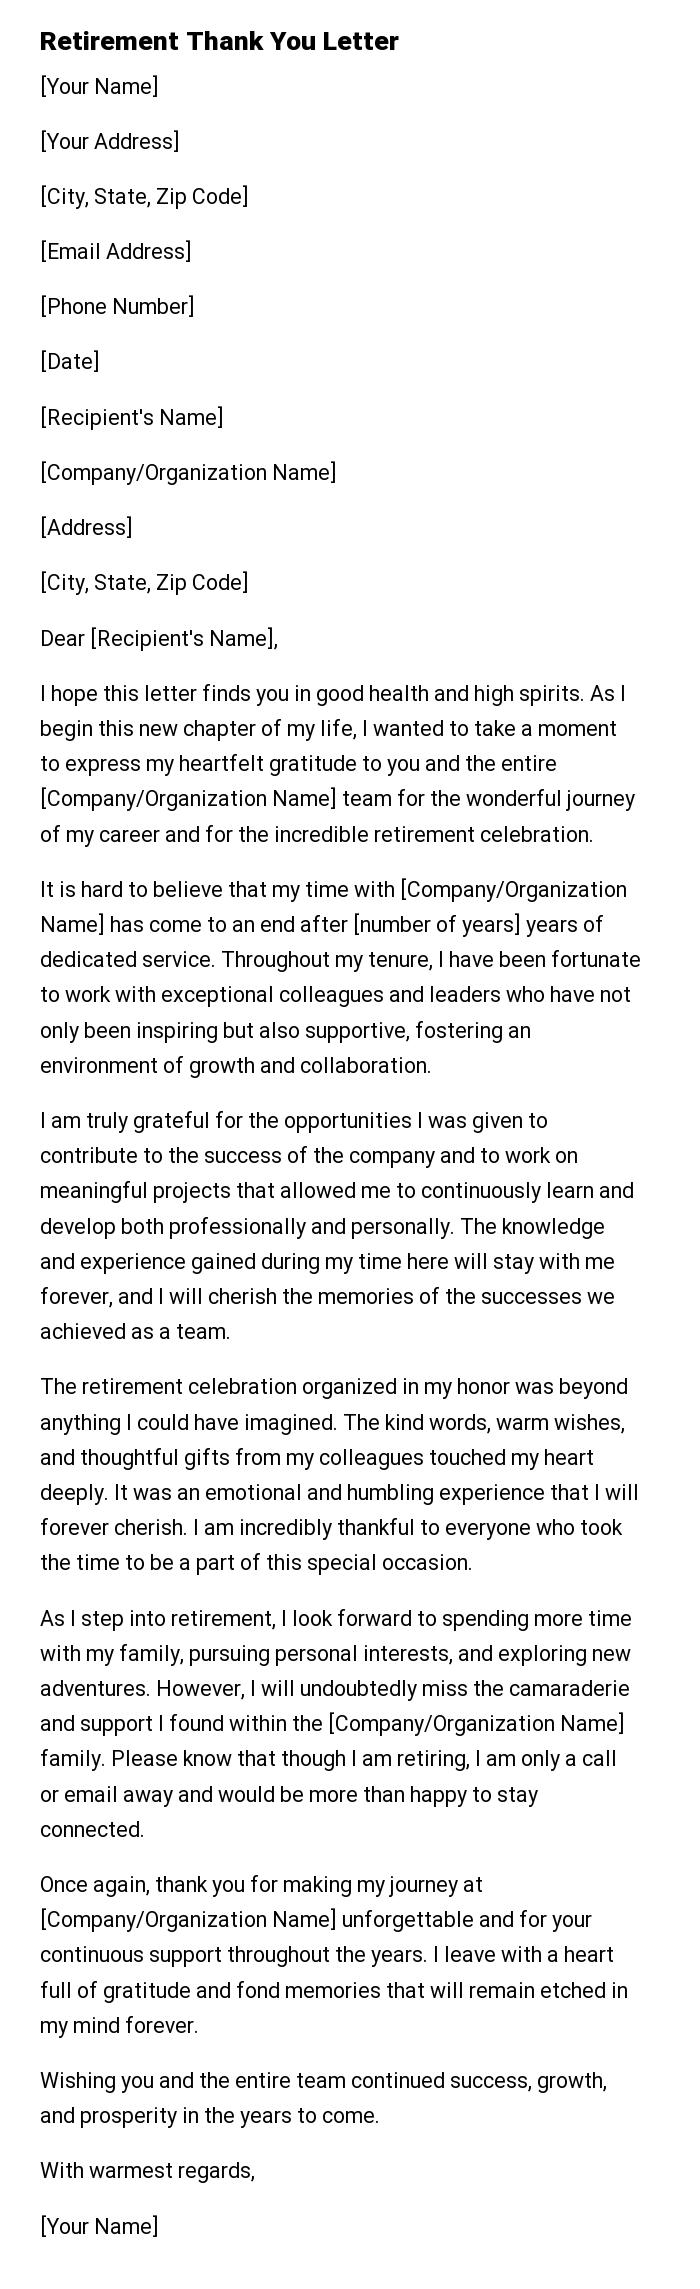 Retirement Thank You Letter